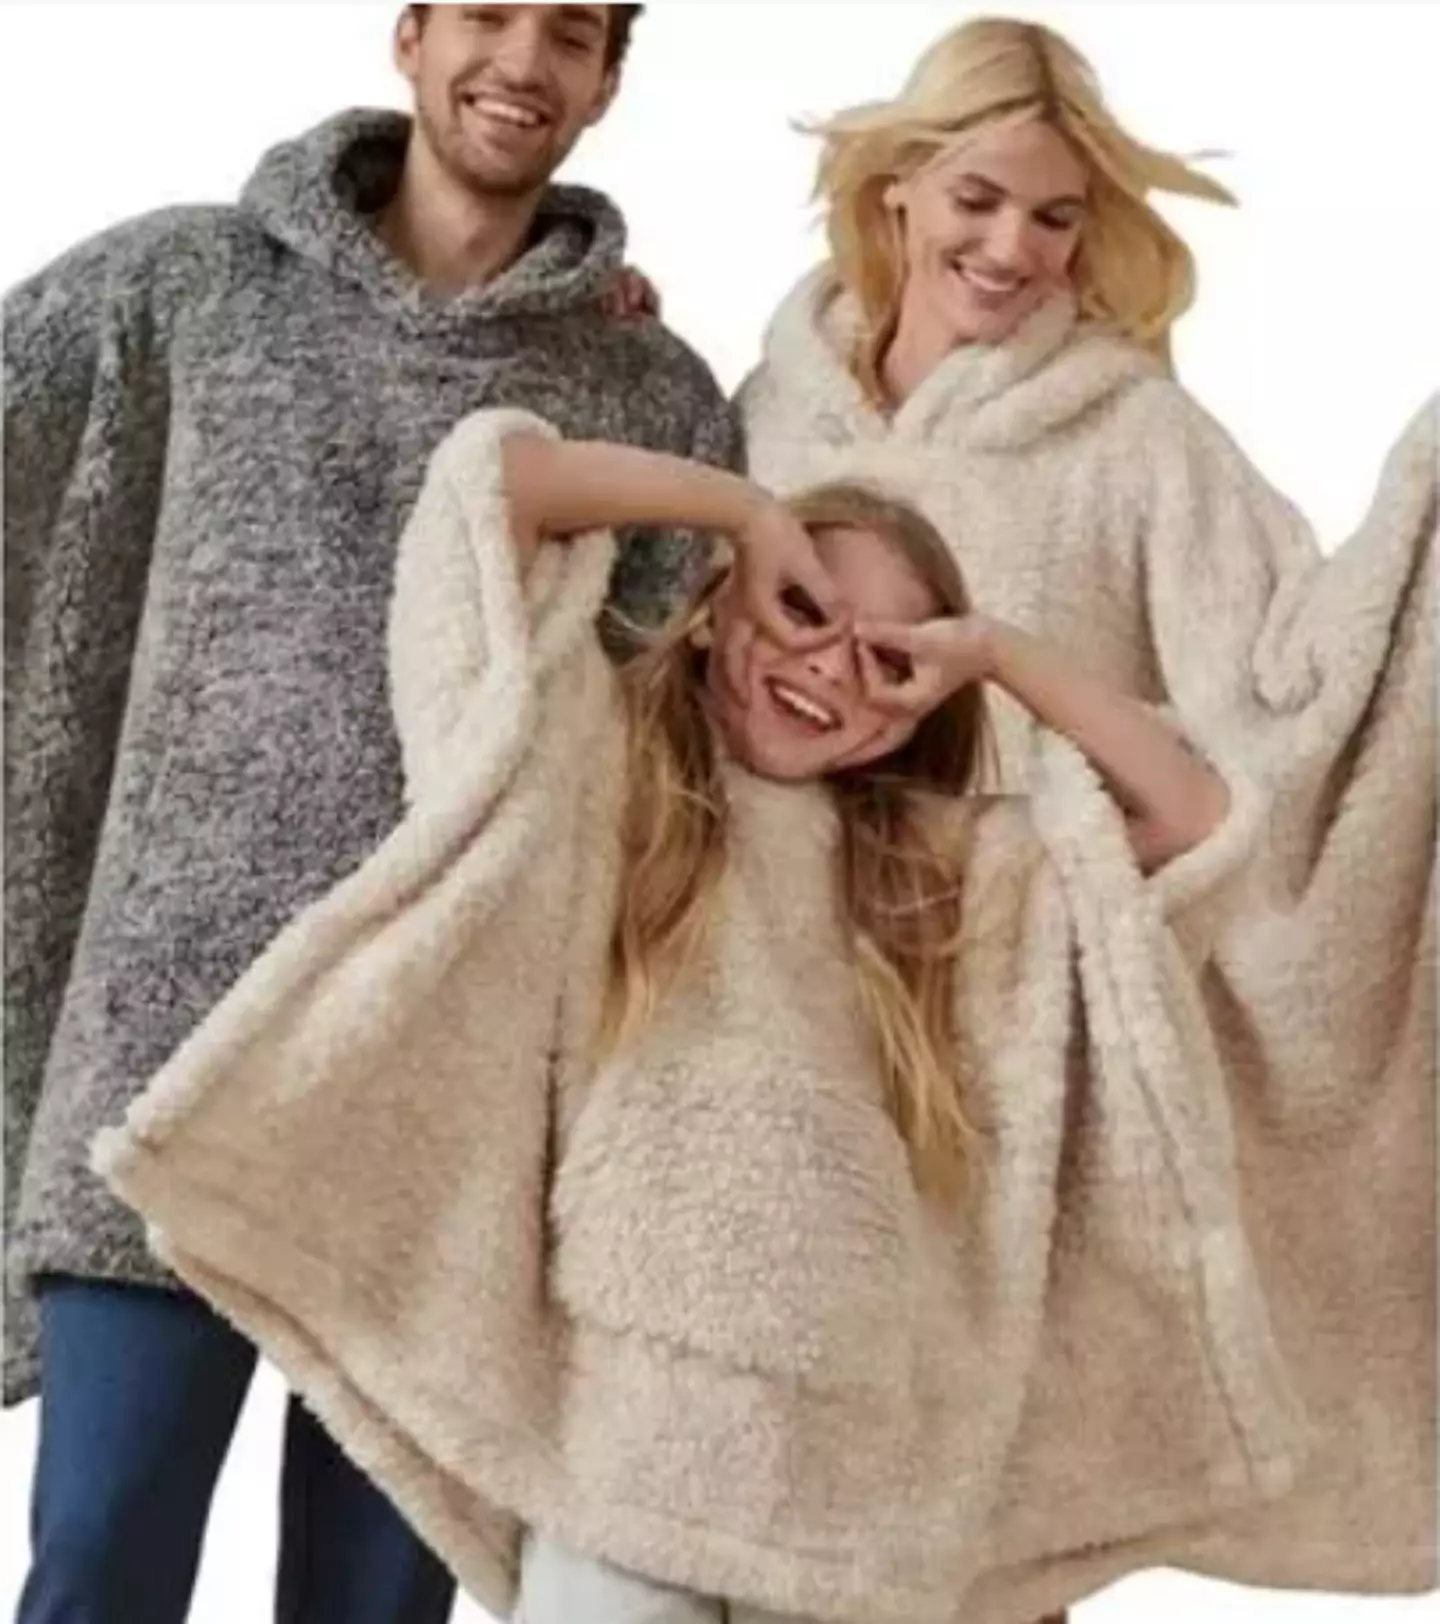 This blanket from Marks and Spencer will keep you cosy.